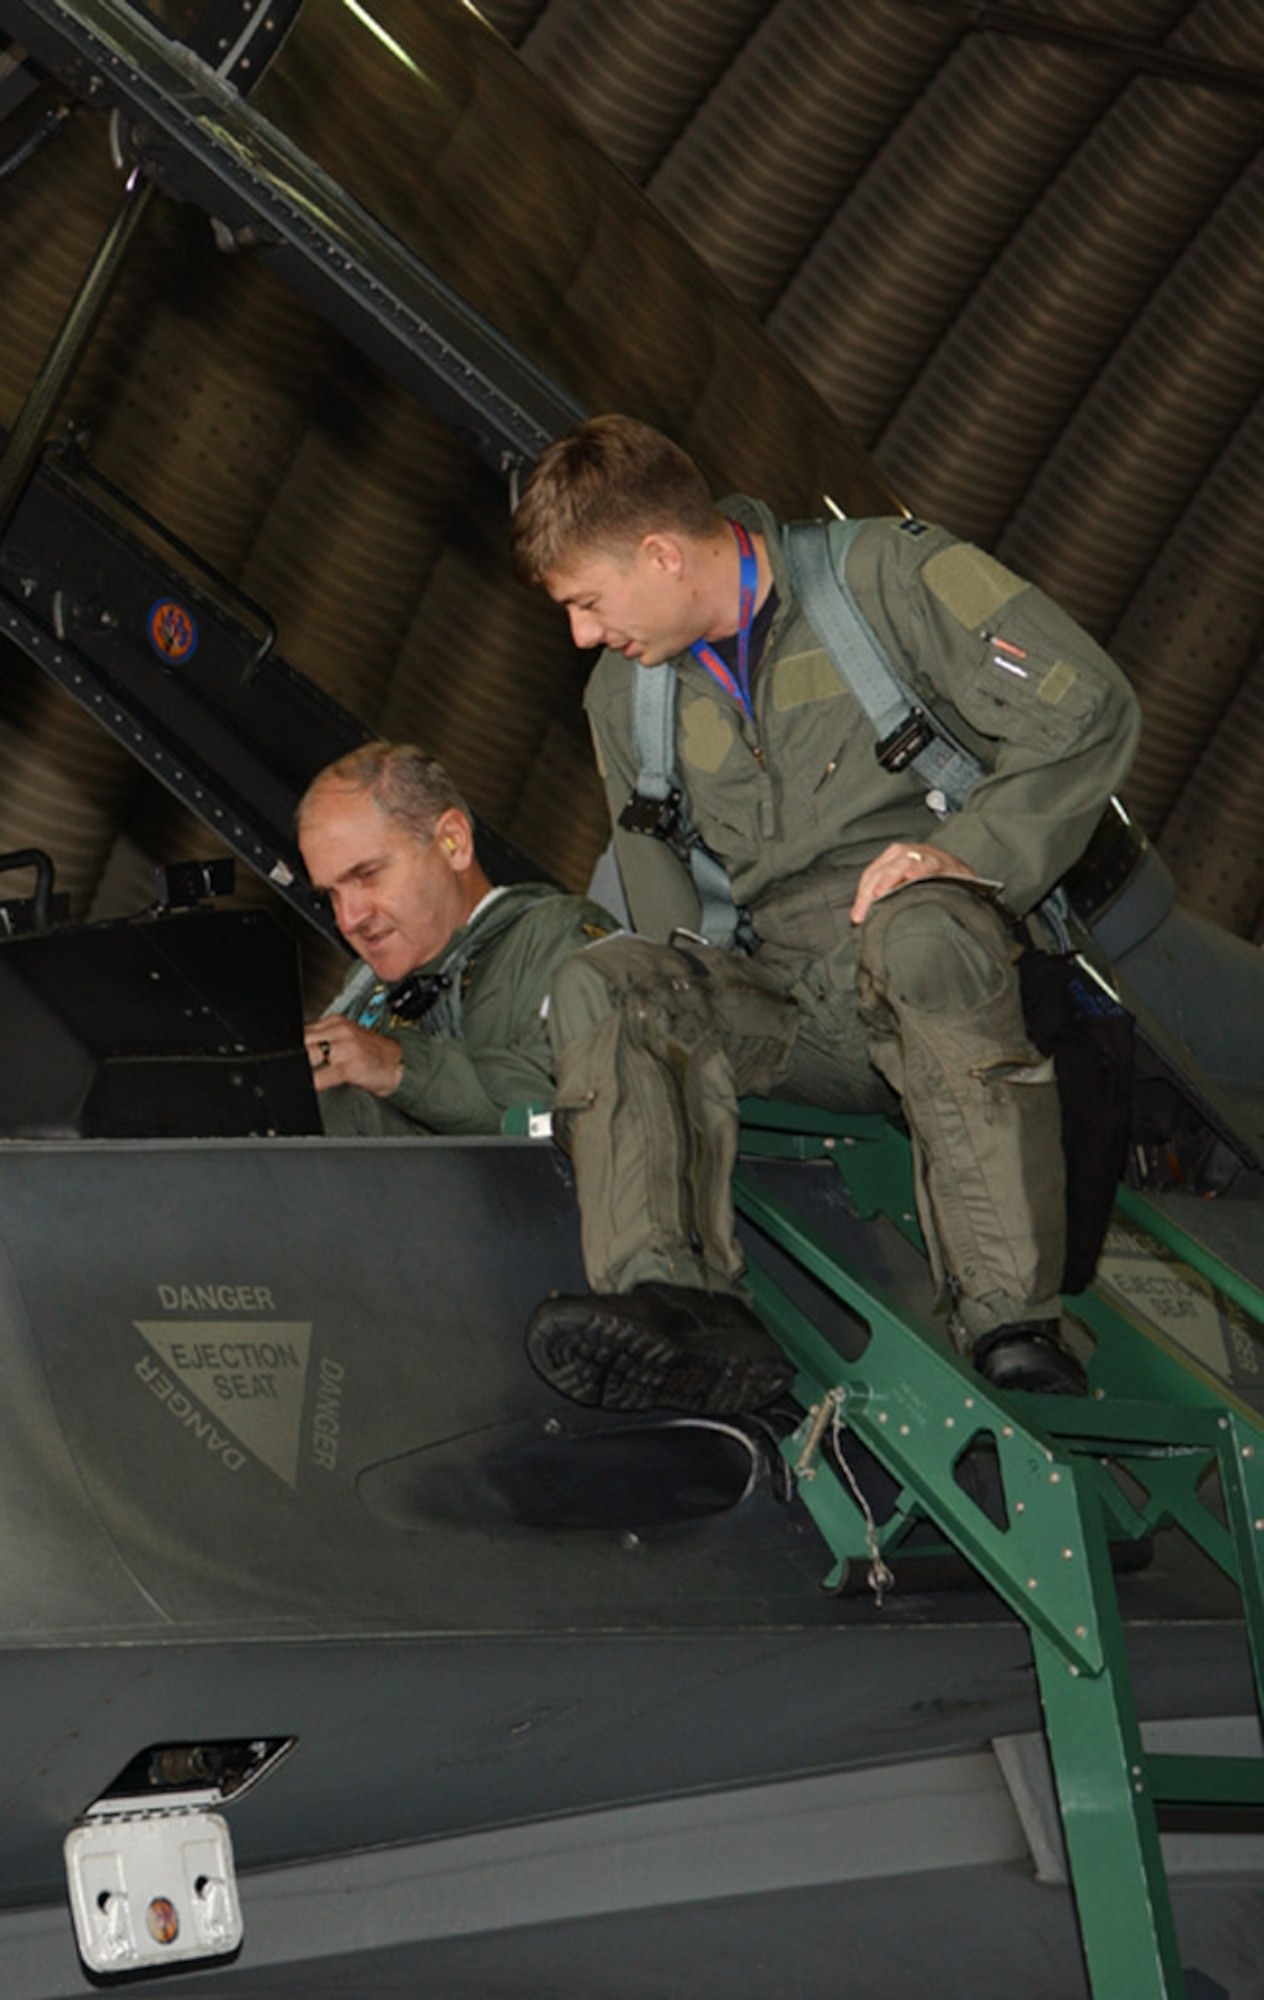 SPANGDAHLEM AIR BASE, Germany -- Capt. James Goeppinger, 23rd Fighter Squadron, helps Lt. Gen. Simeon Hristov Simeonov, Bulgarian air force commander, strap into this seat and explains the layout of the cockpit prior to their F-16 flight Sept. 19, 2007. General Simeonov traveled to Spangdahlem Air Base to for an orientation tour. (U.S. Air Force photo/Airman 1st Class Allen Pollard) 